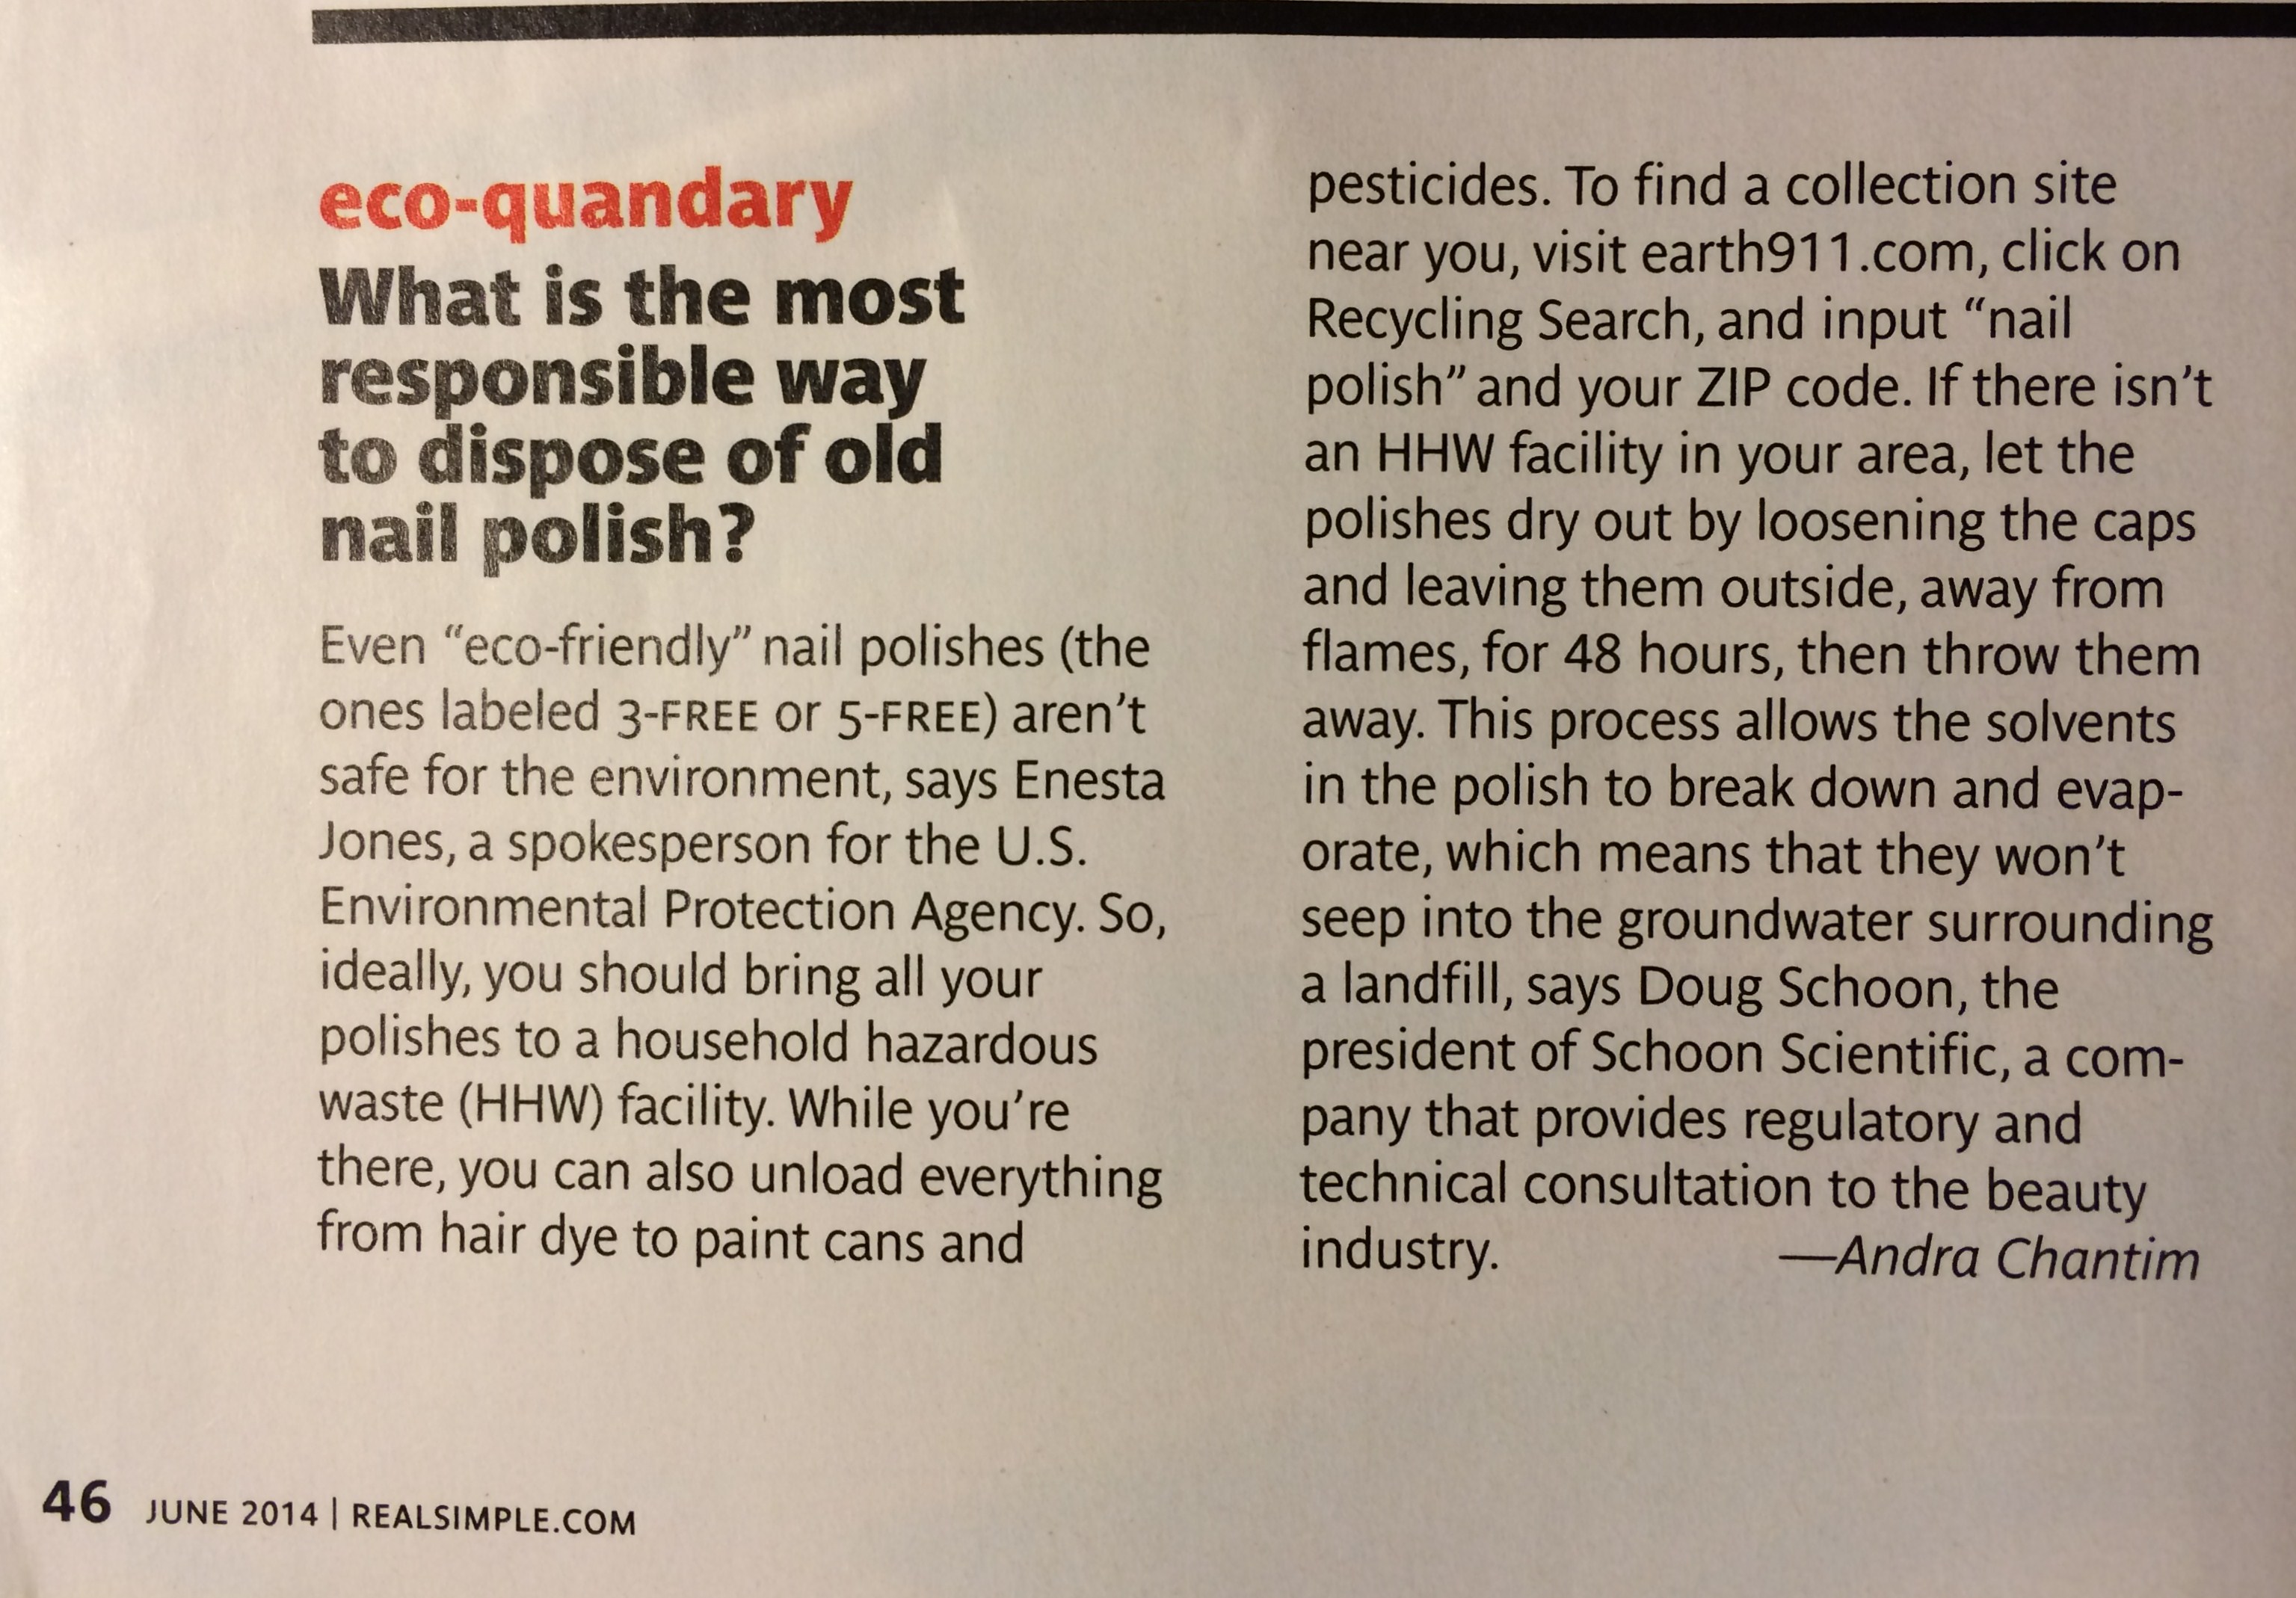 Photo of an article from Real Simple, June 2014 on page 46: "eco-quandary: What is the most responsible way to dispose of old nail polish? Even 'eco-friendly' nail polishes (the ones labeled 3-FREE or 5-FREE) aren't safe for the environment, says Enesta Jones, a spokesperson for the U.S. Environmental Protection Agency. So, ideally, you should bring all your polishes to a household hazardous waste (HHW) facility. While you're there, you can also unload everything from hair dye to paint cans and pesticides. To find a collection site near you, visit earth911.com, click on Recycling Search, and input 'nail polish' and your ZIP code. If there isn't an HHW facility in your area, let the polishes dry out by loosening the caps and leaving them outside, away from flames for 48 hours, then throw them away. This process allows the solvents in the polish to break down and evaporate, which means that they won't seep into the groundwater surrounding a landfill, says Doug Schoon, the president of Schoon Scientific, a company that provides regulatory and technical consultation to the beauty industry.     --Andra Chantim"